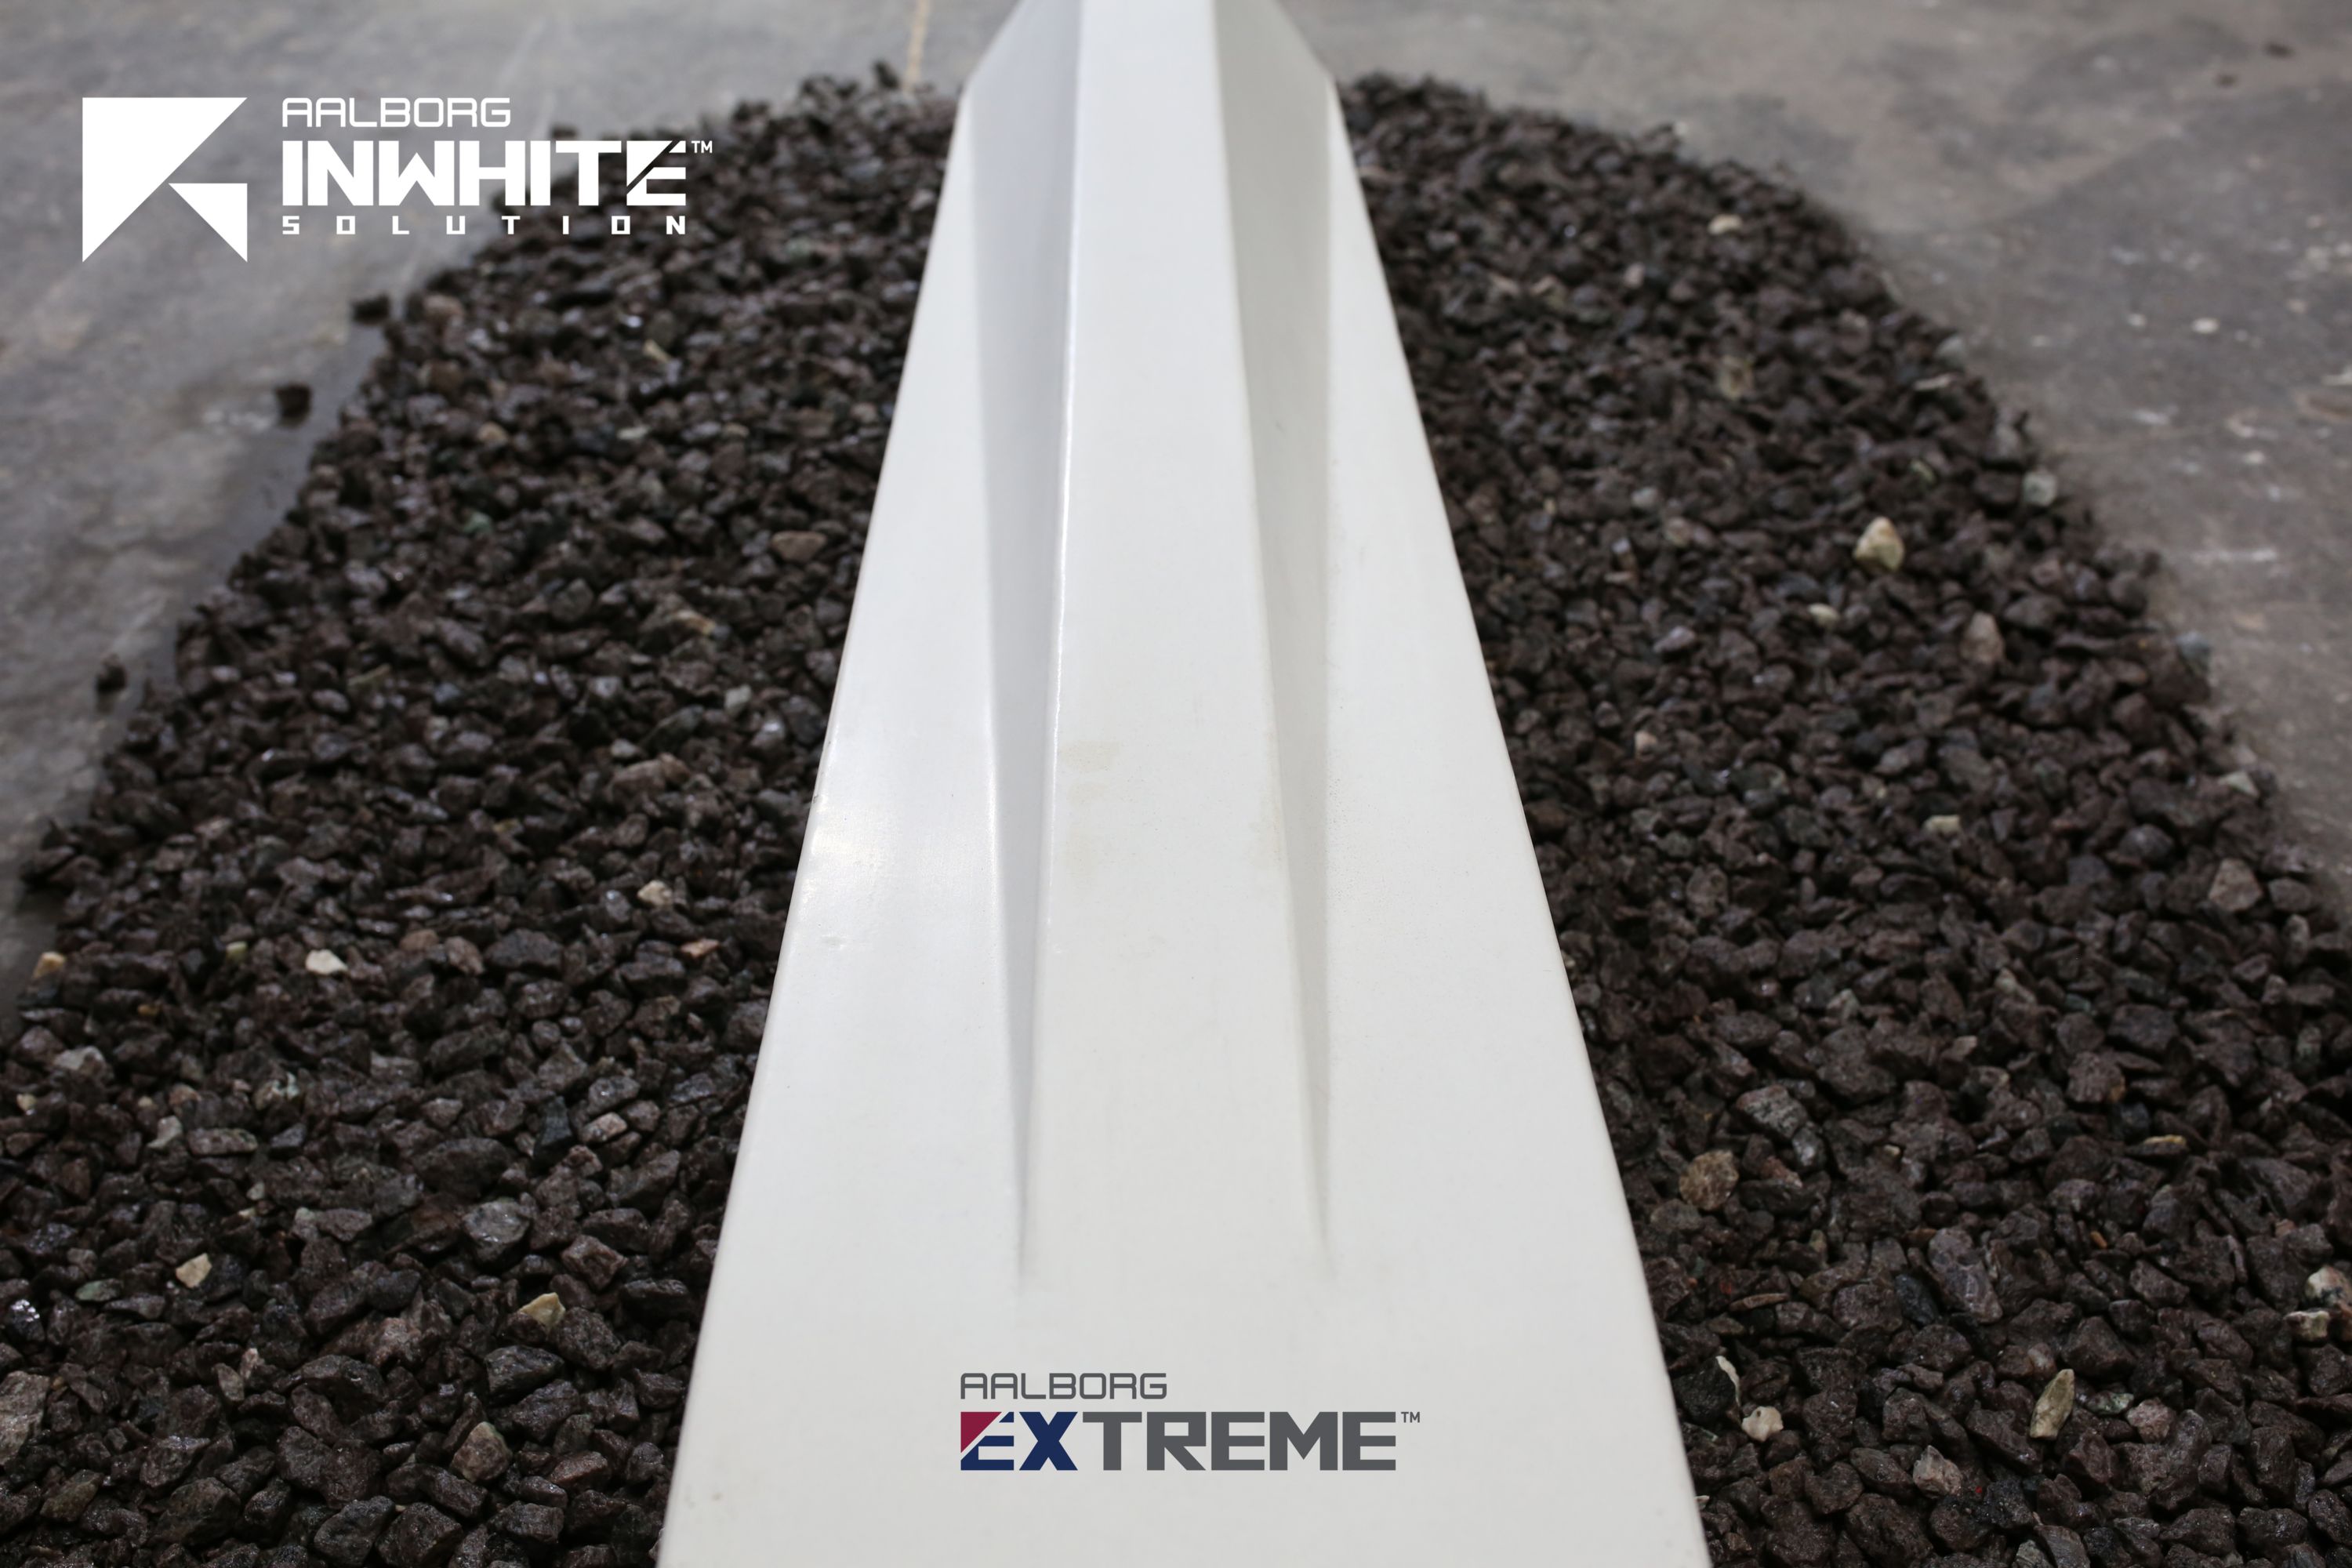 Since November 2018, Aalborg Extreme Light 120, the new generation of premixed Ultra High- Performance Concrete (UHPC) based on Aalborg White cement is being launched in the global market.